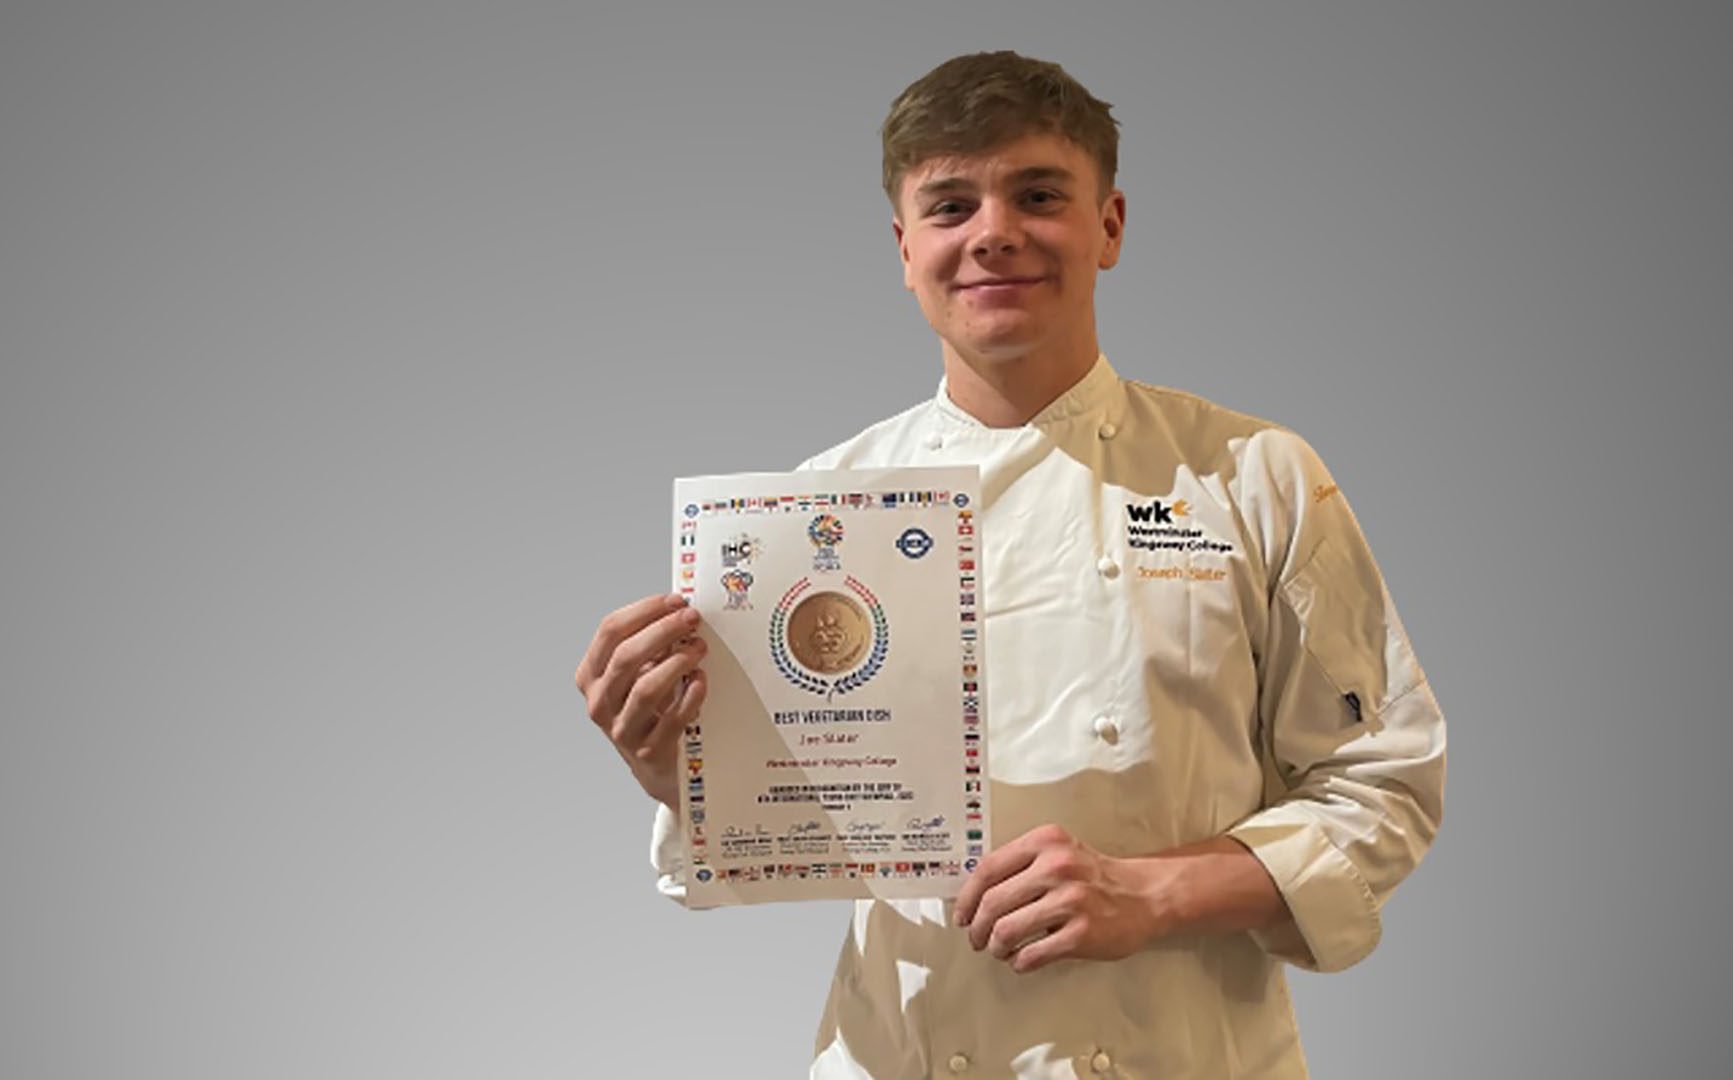 Student Joe Slater wins Best Vegetarian Dish in International Young Chef Olympiad